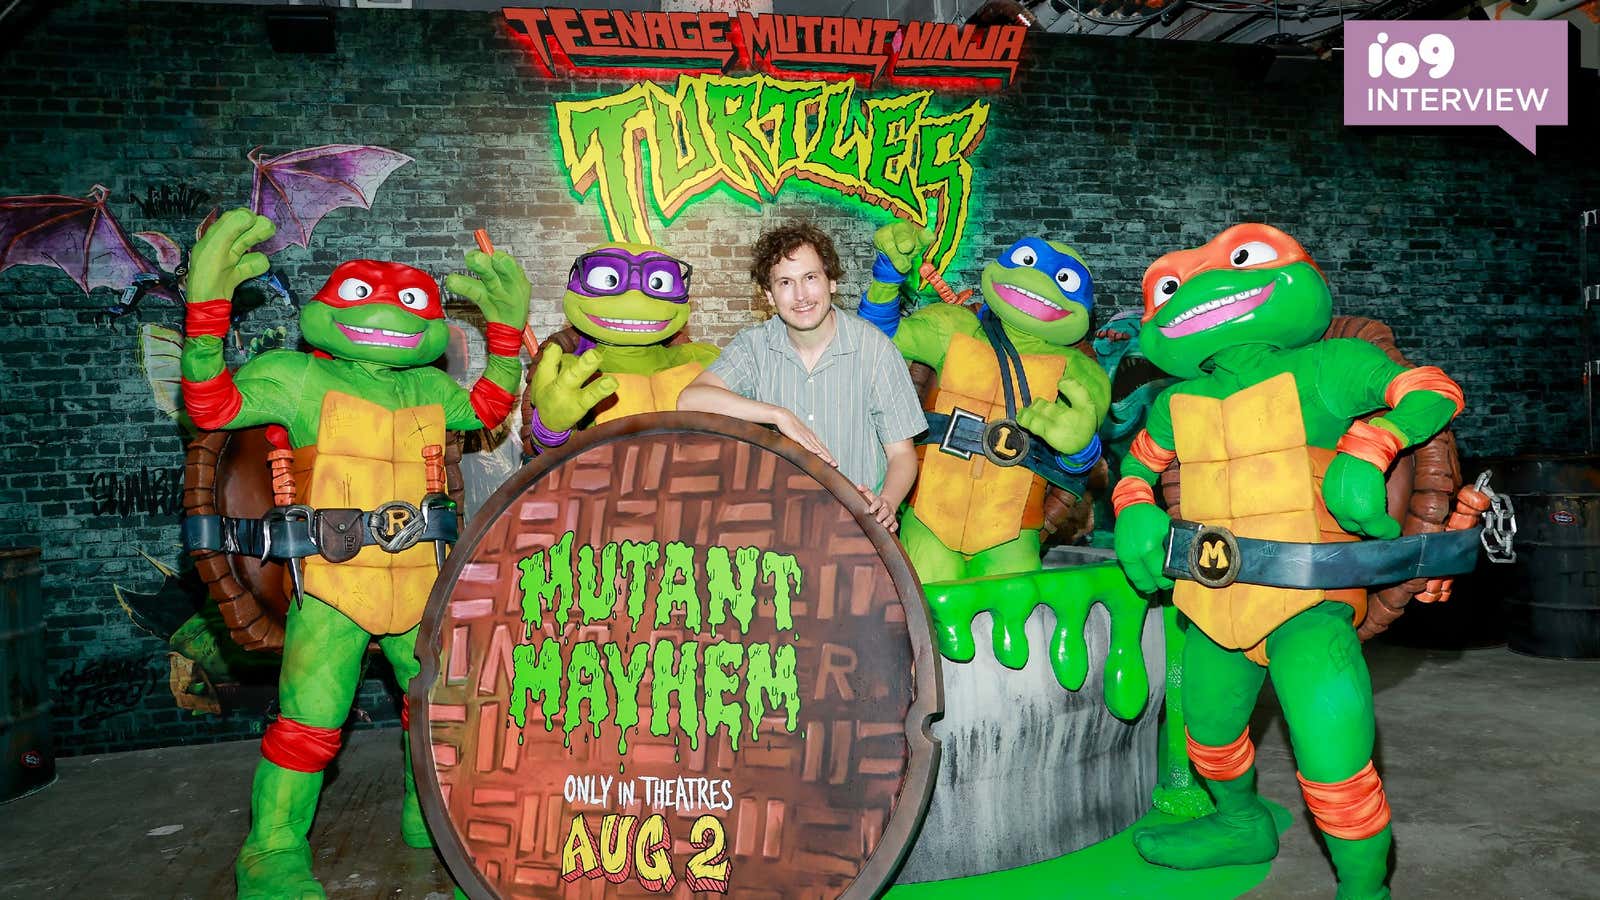 All you need to know about the Teenage Mutant Ninja Turtles